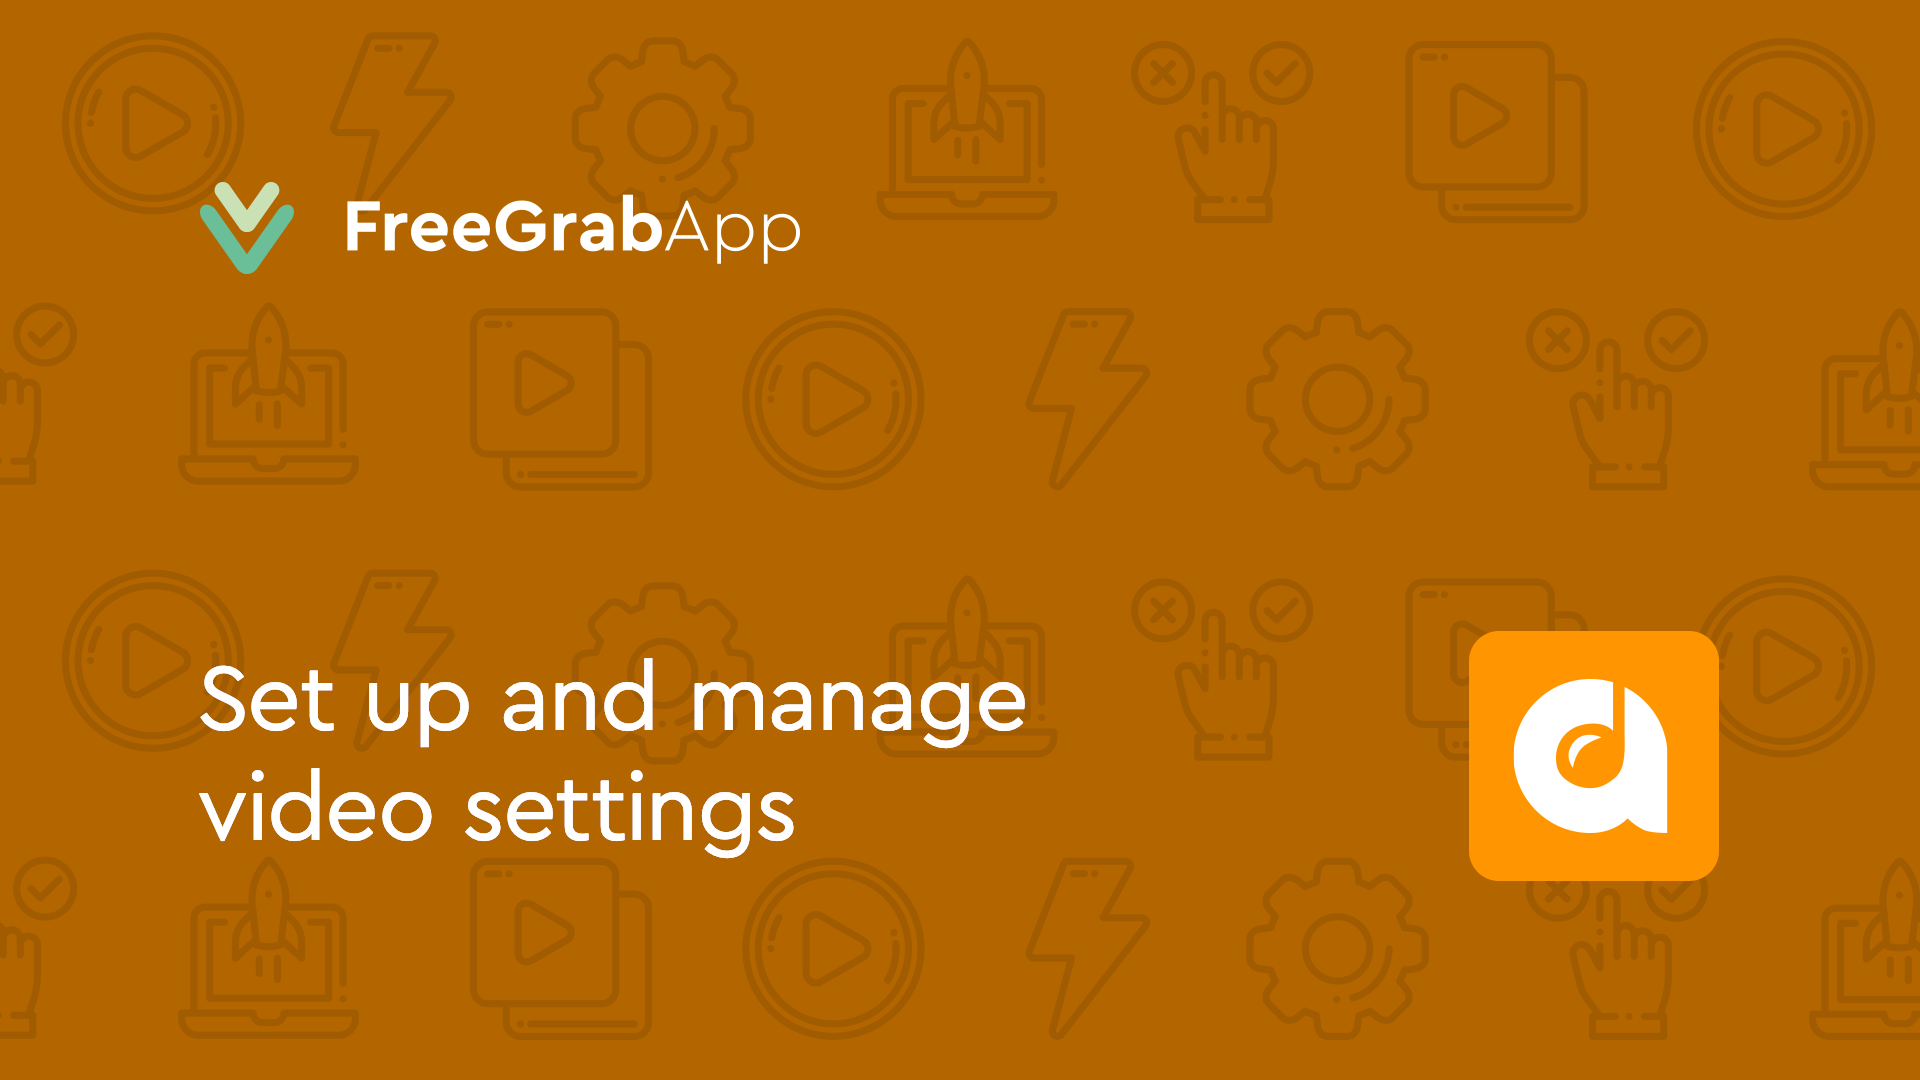 Free Amazon Music Download – Set up and manage video settings